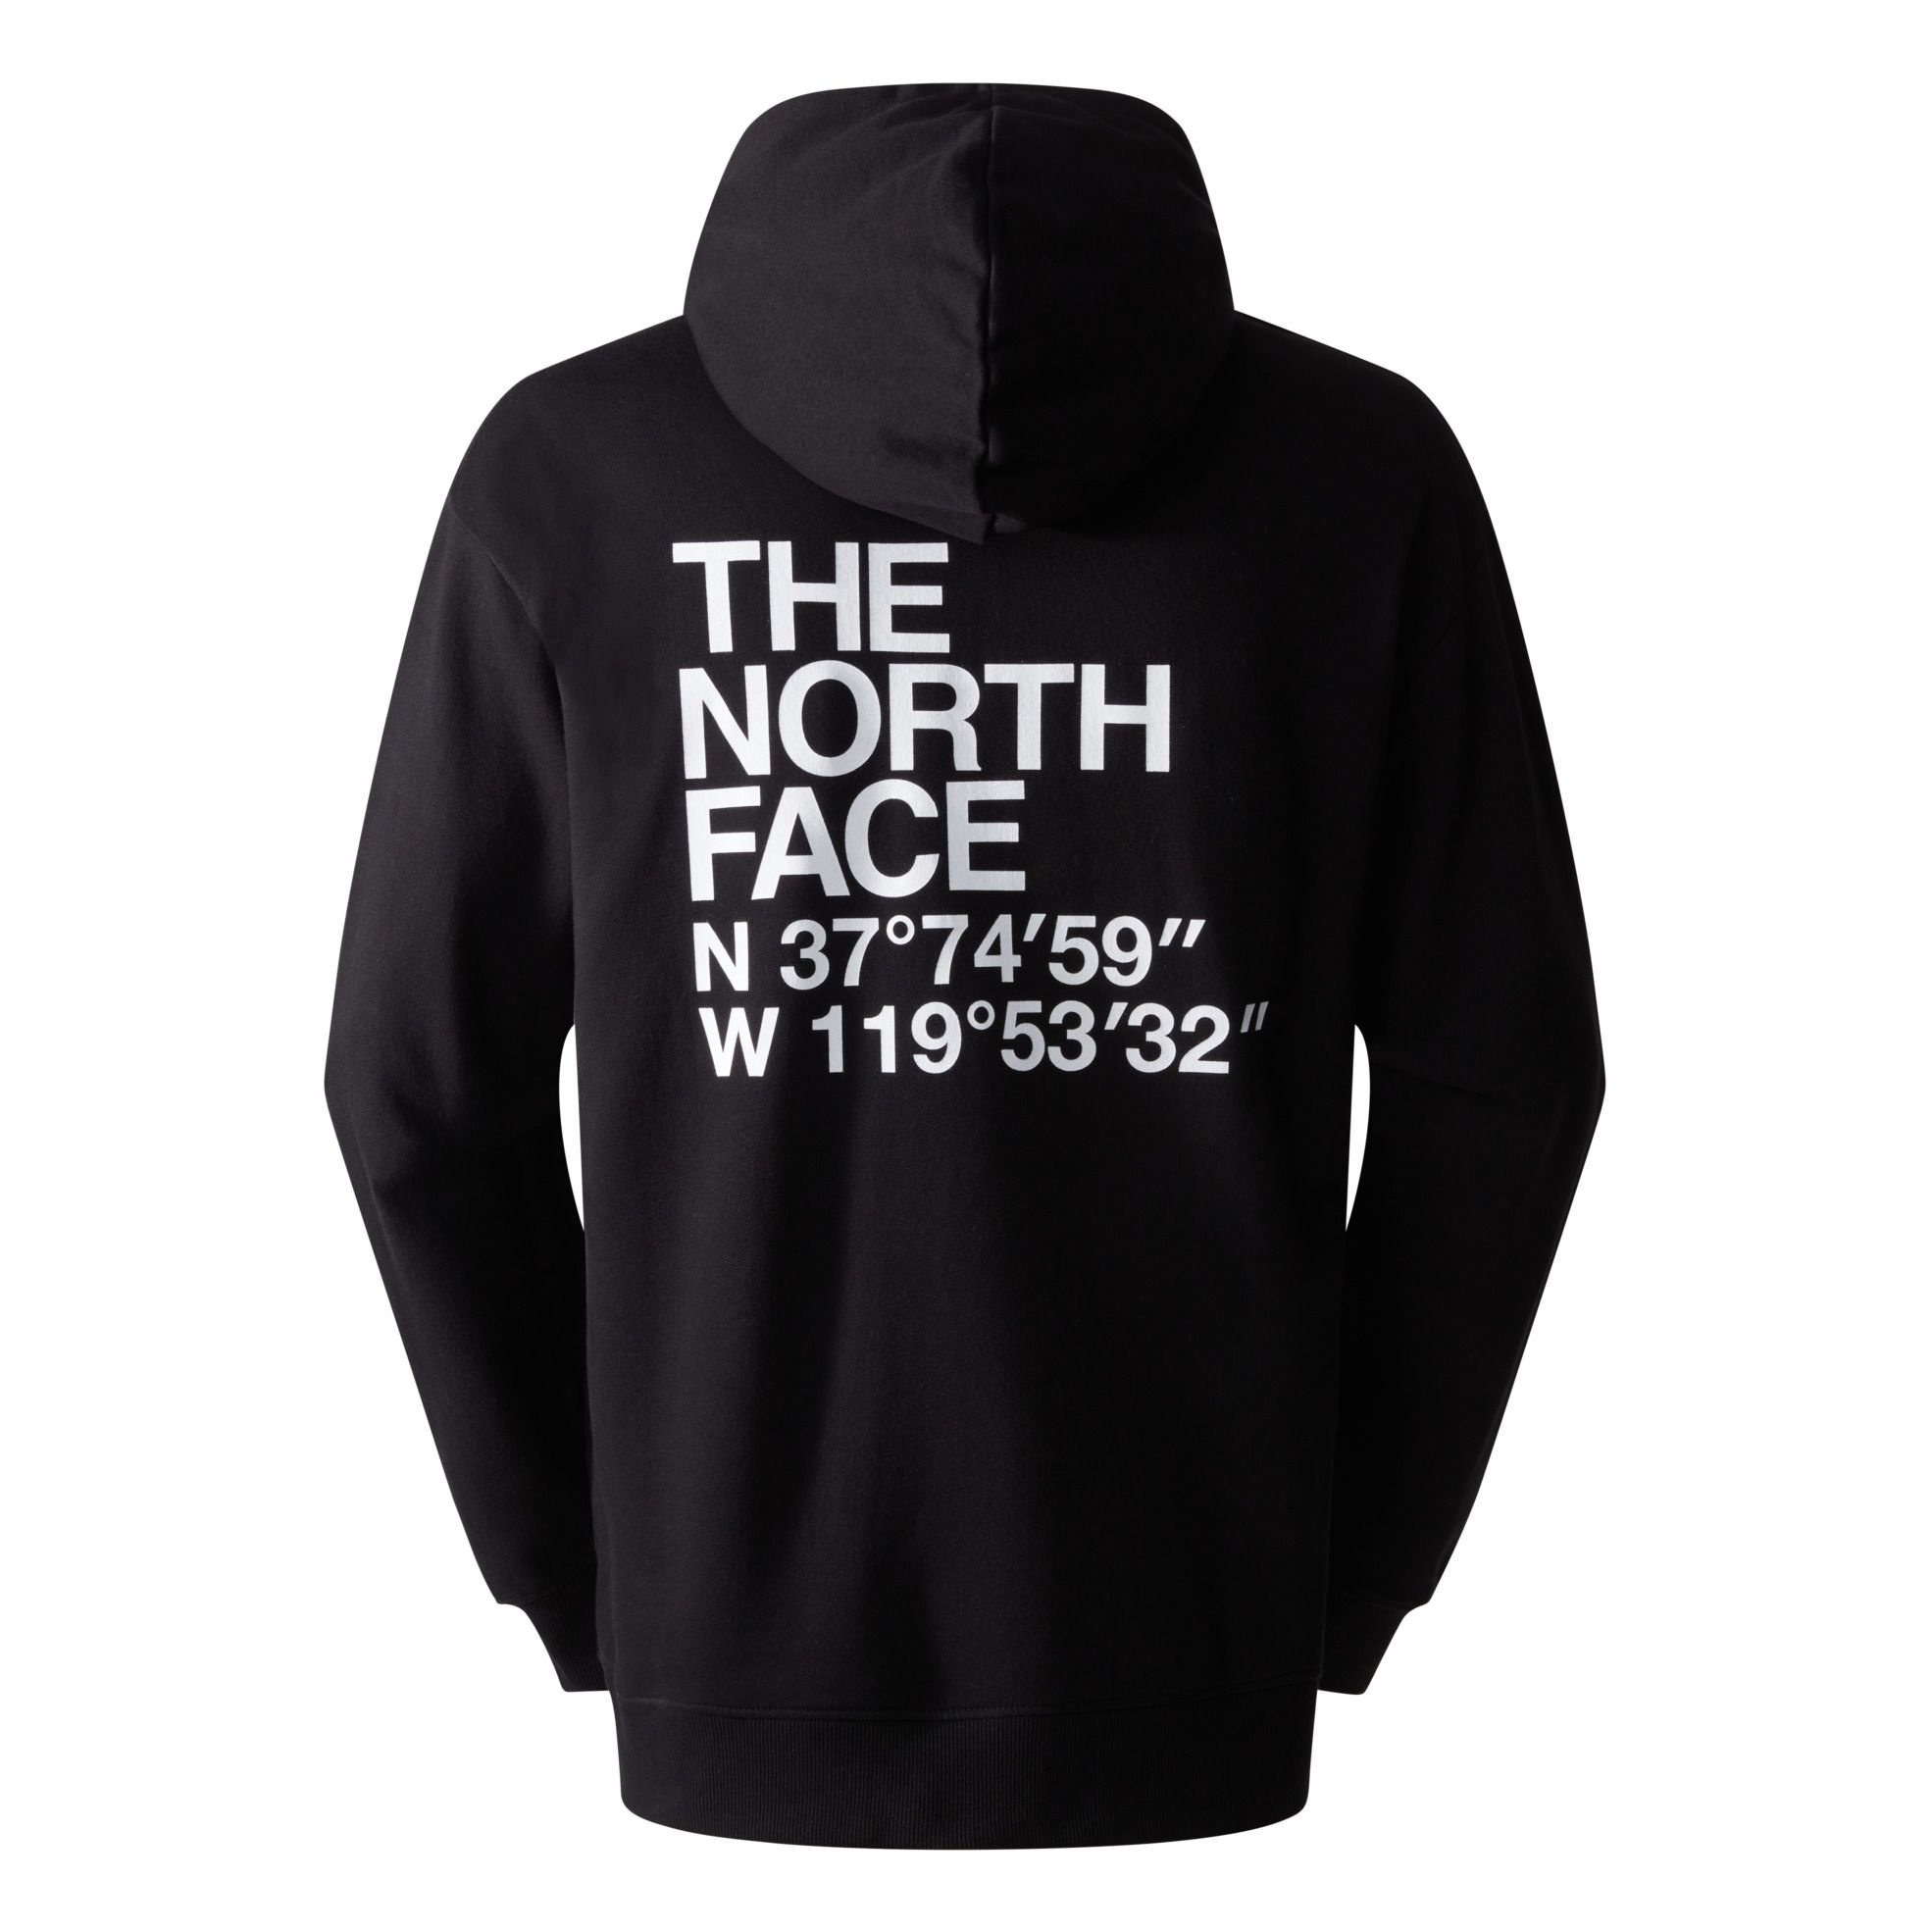 The North Face - Hoodie Coordinates - Black